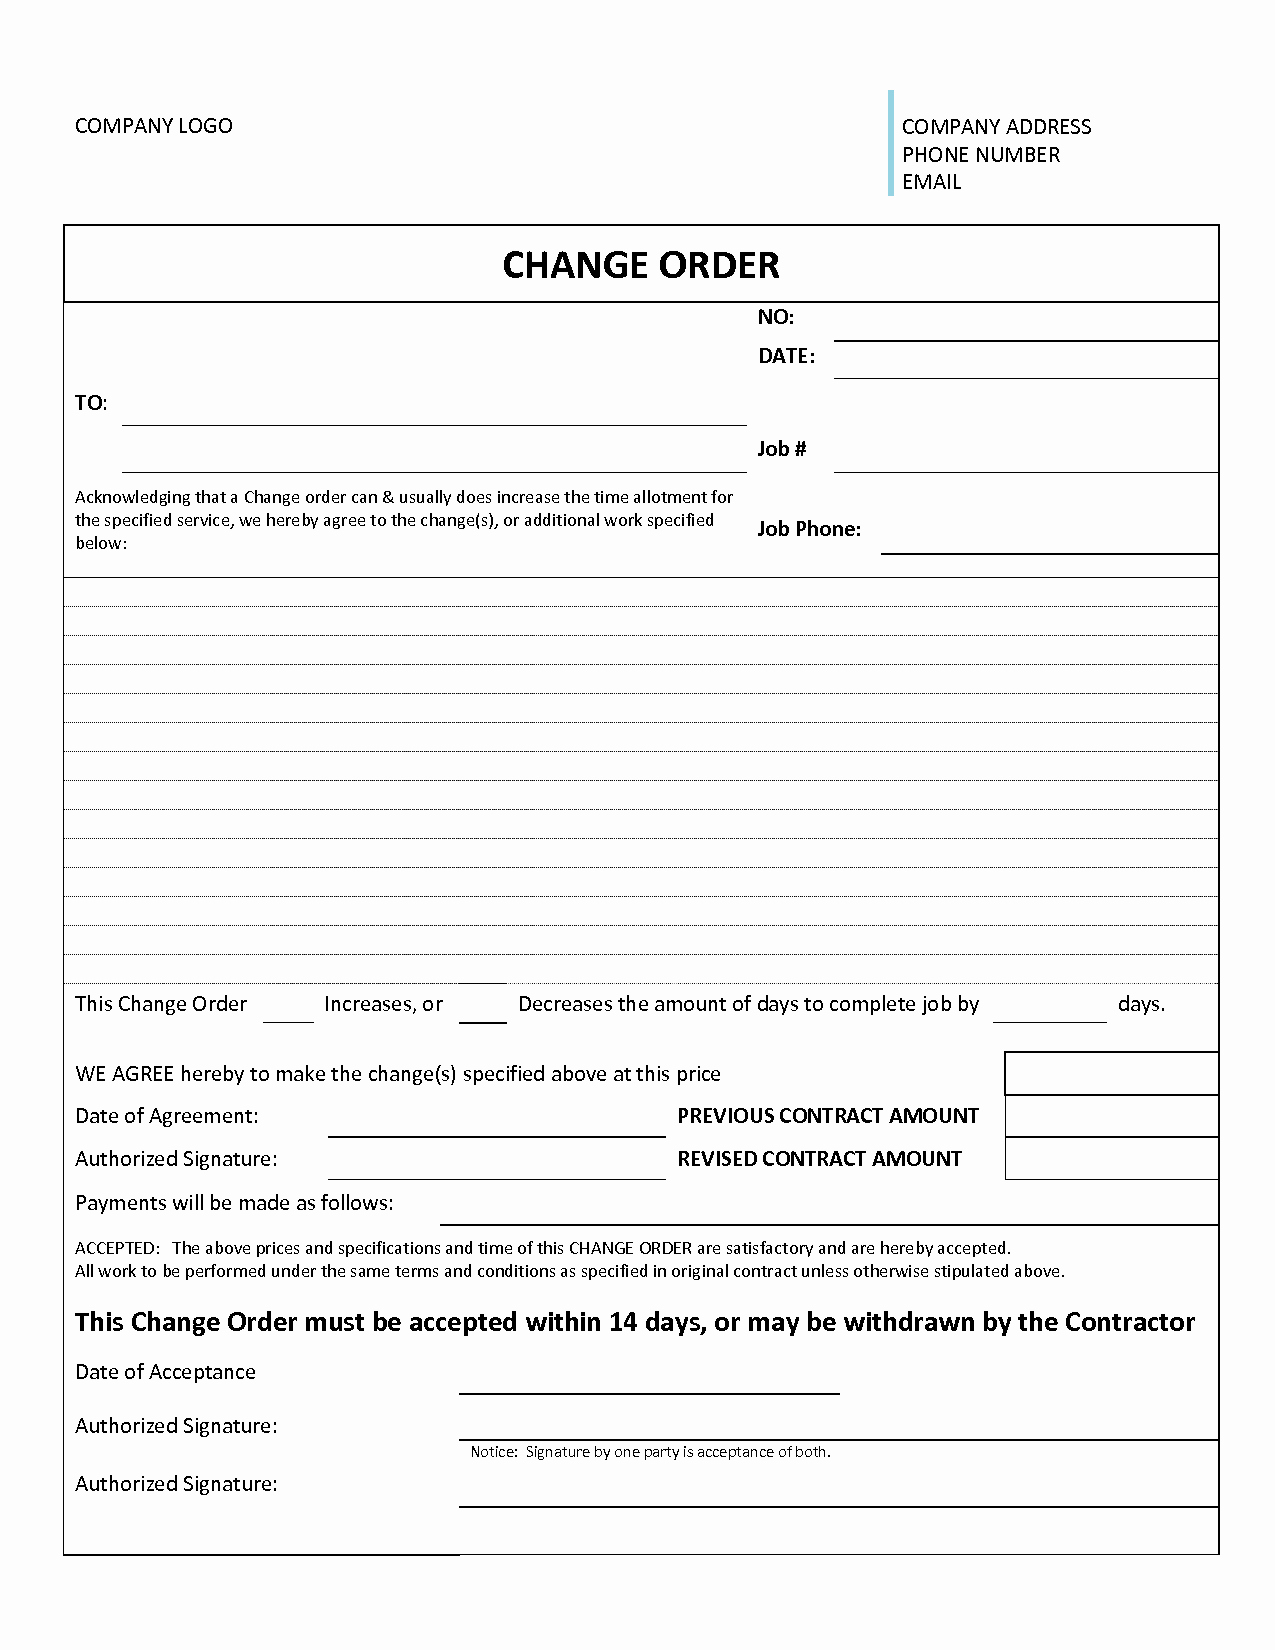 Free Change order Template New Change order form Template